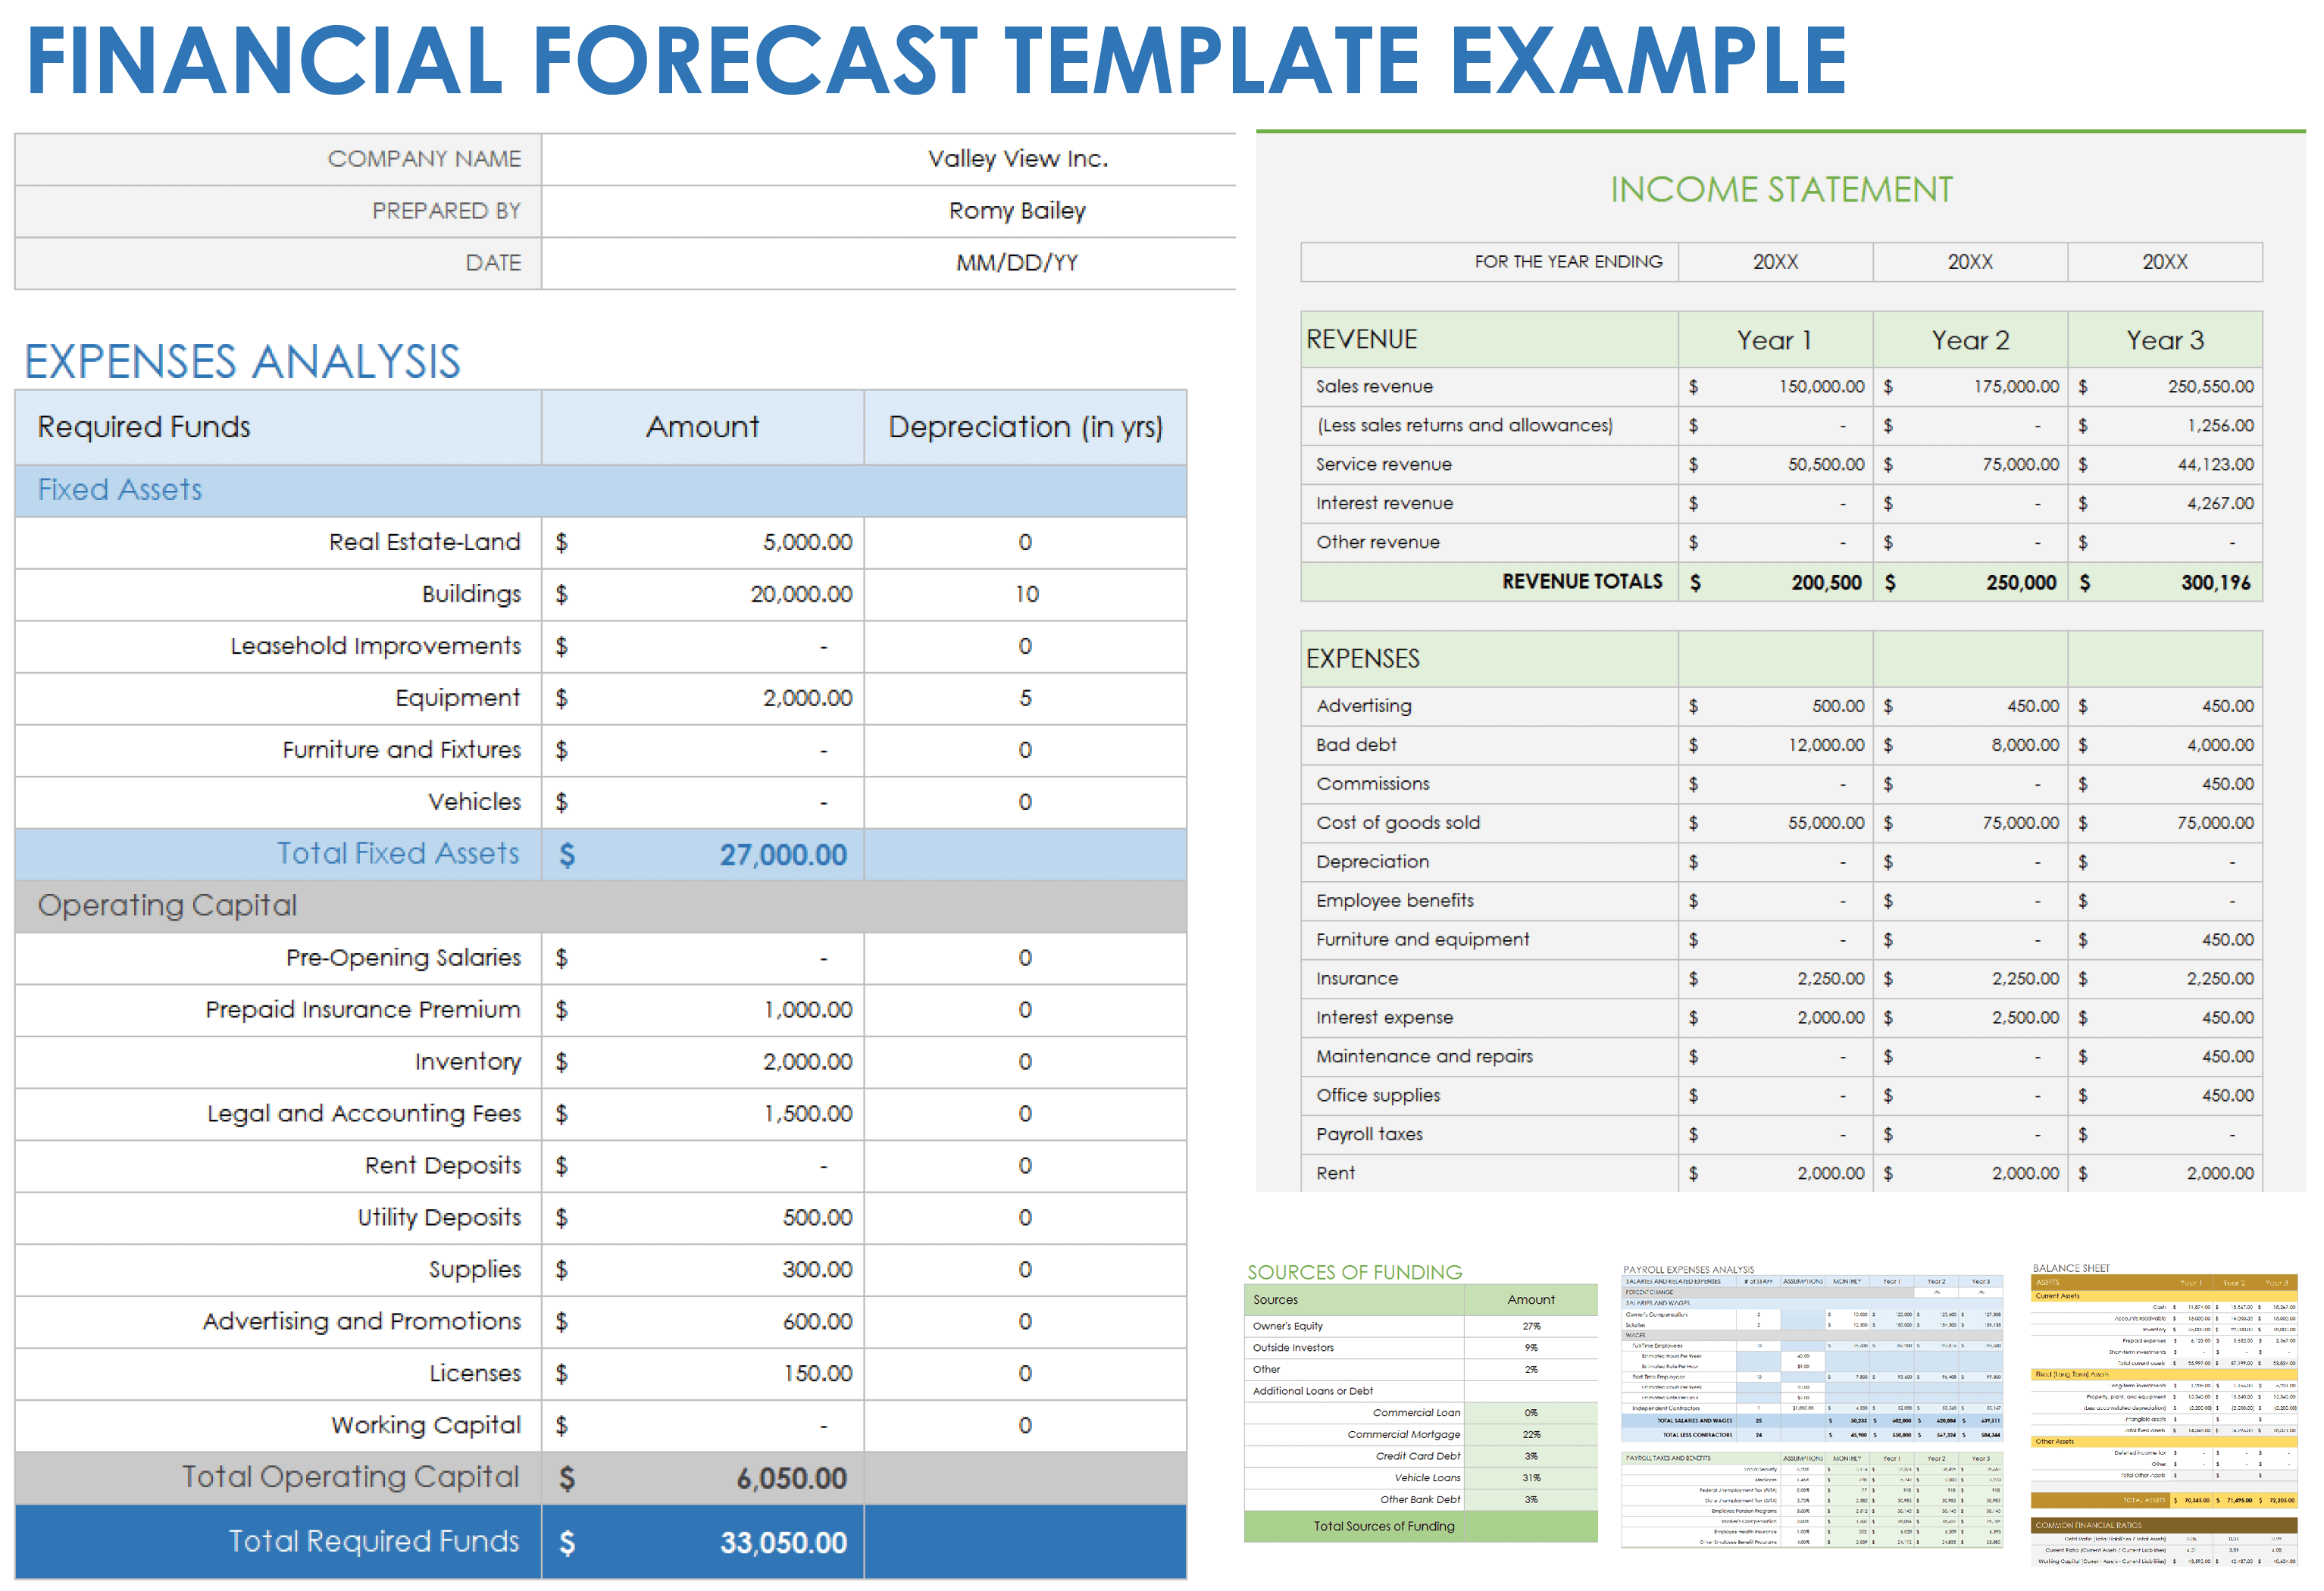 Financial Forecast Example Template